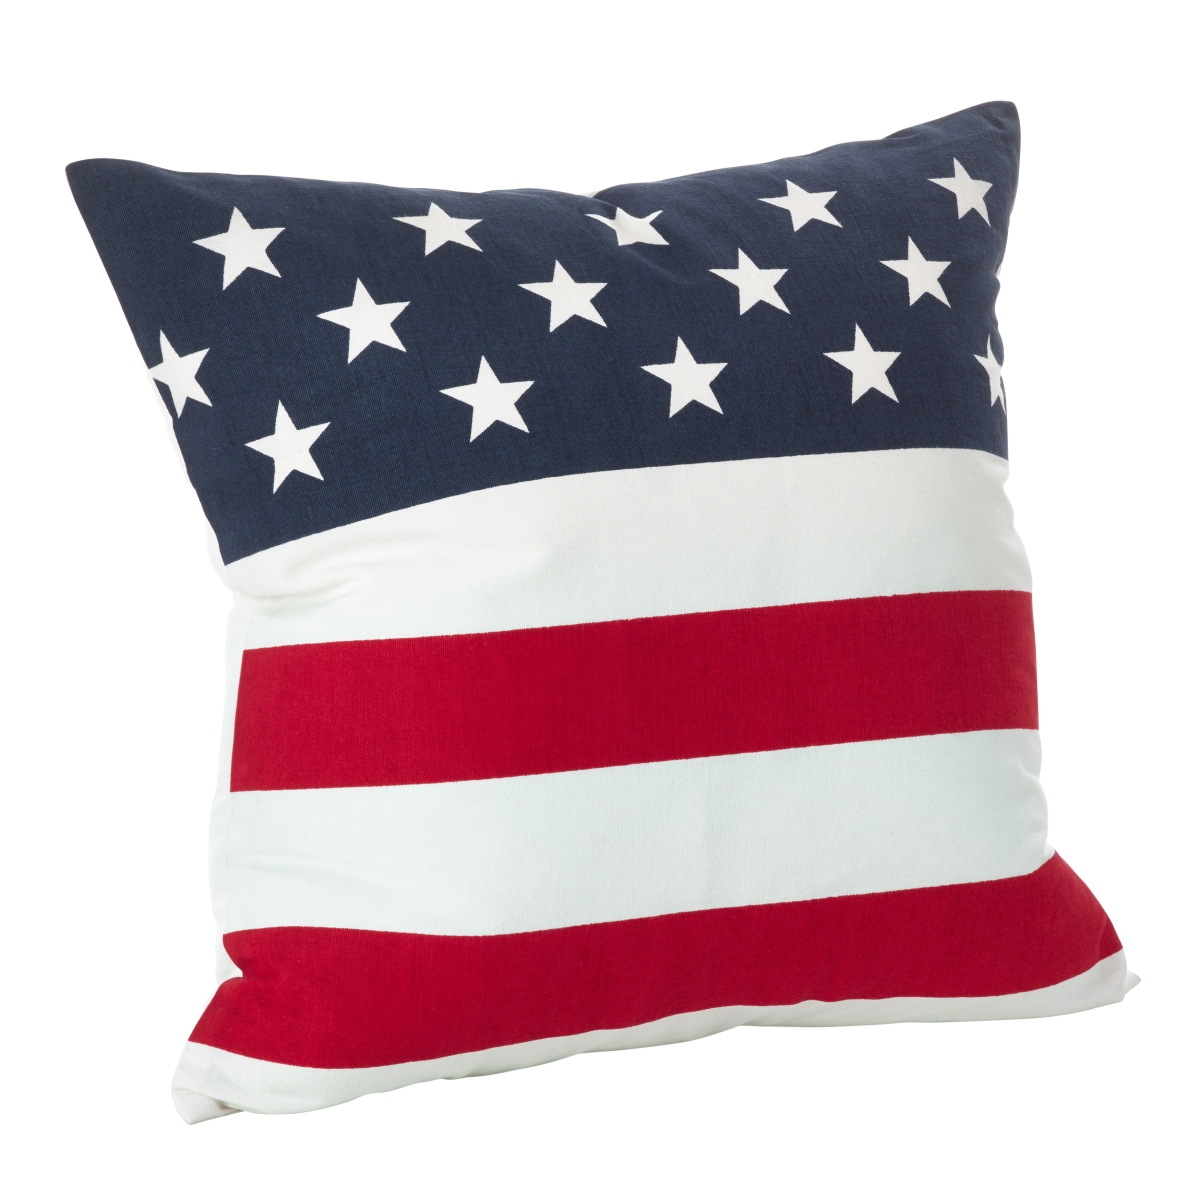 0704p.m20s 20 In. American Flag Design Cotton Down Filled Throw Pillow, Multi Color